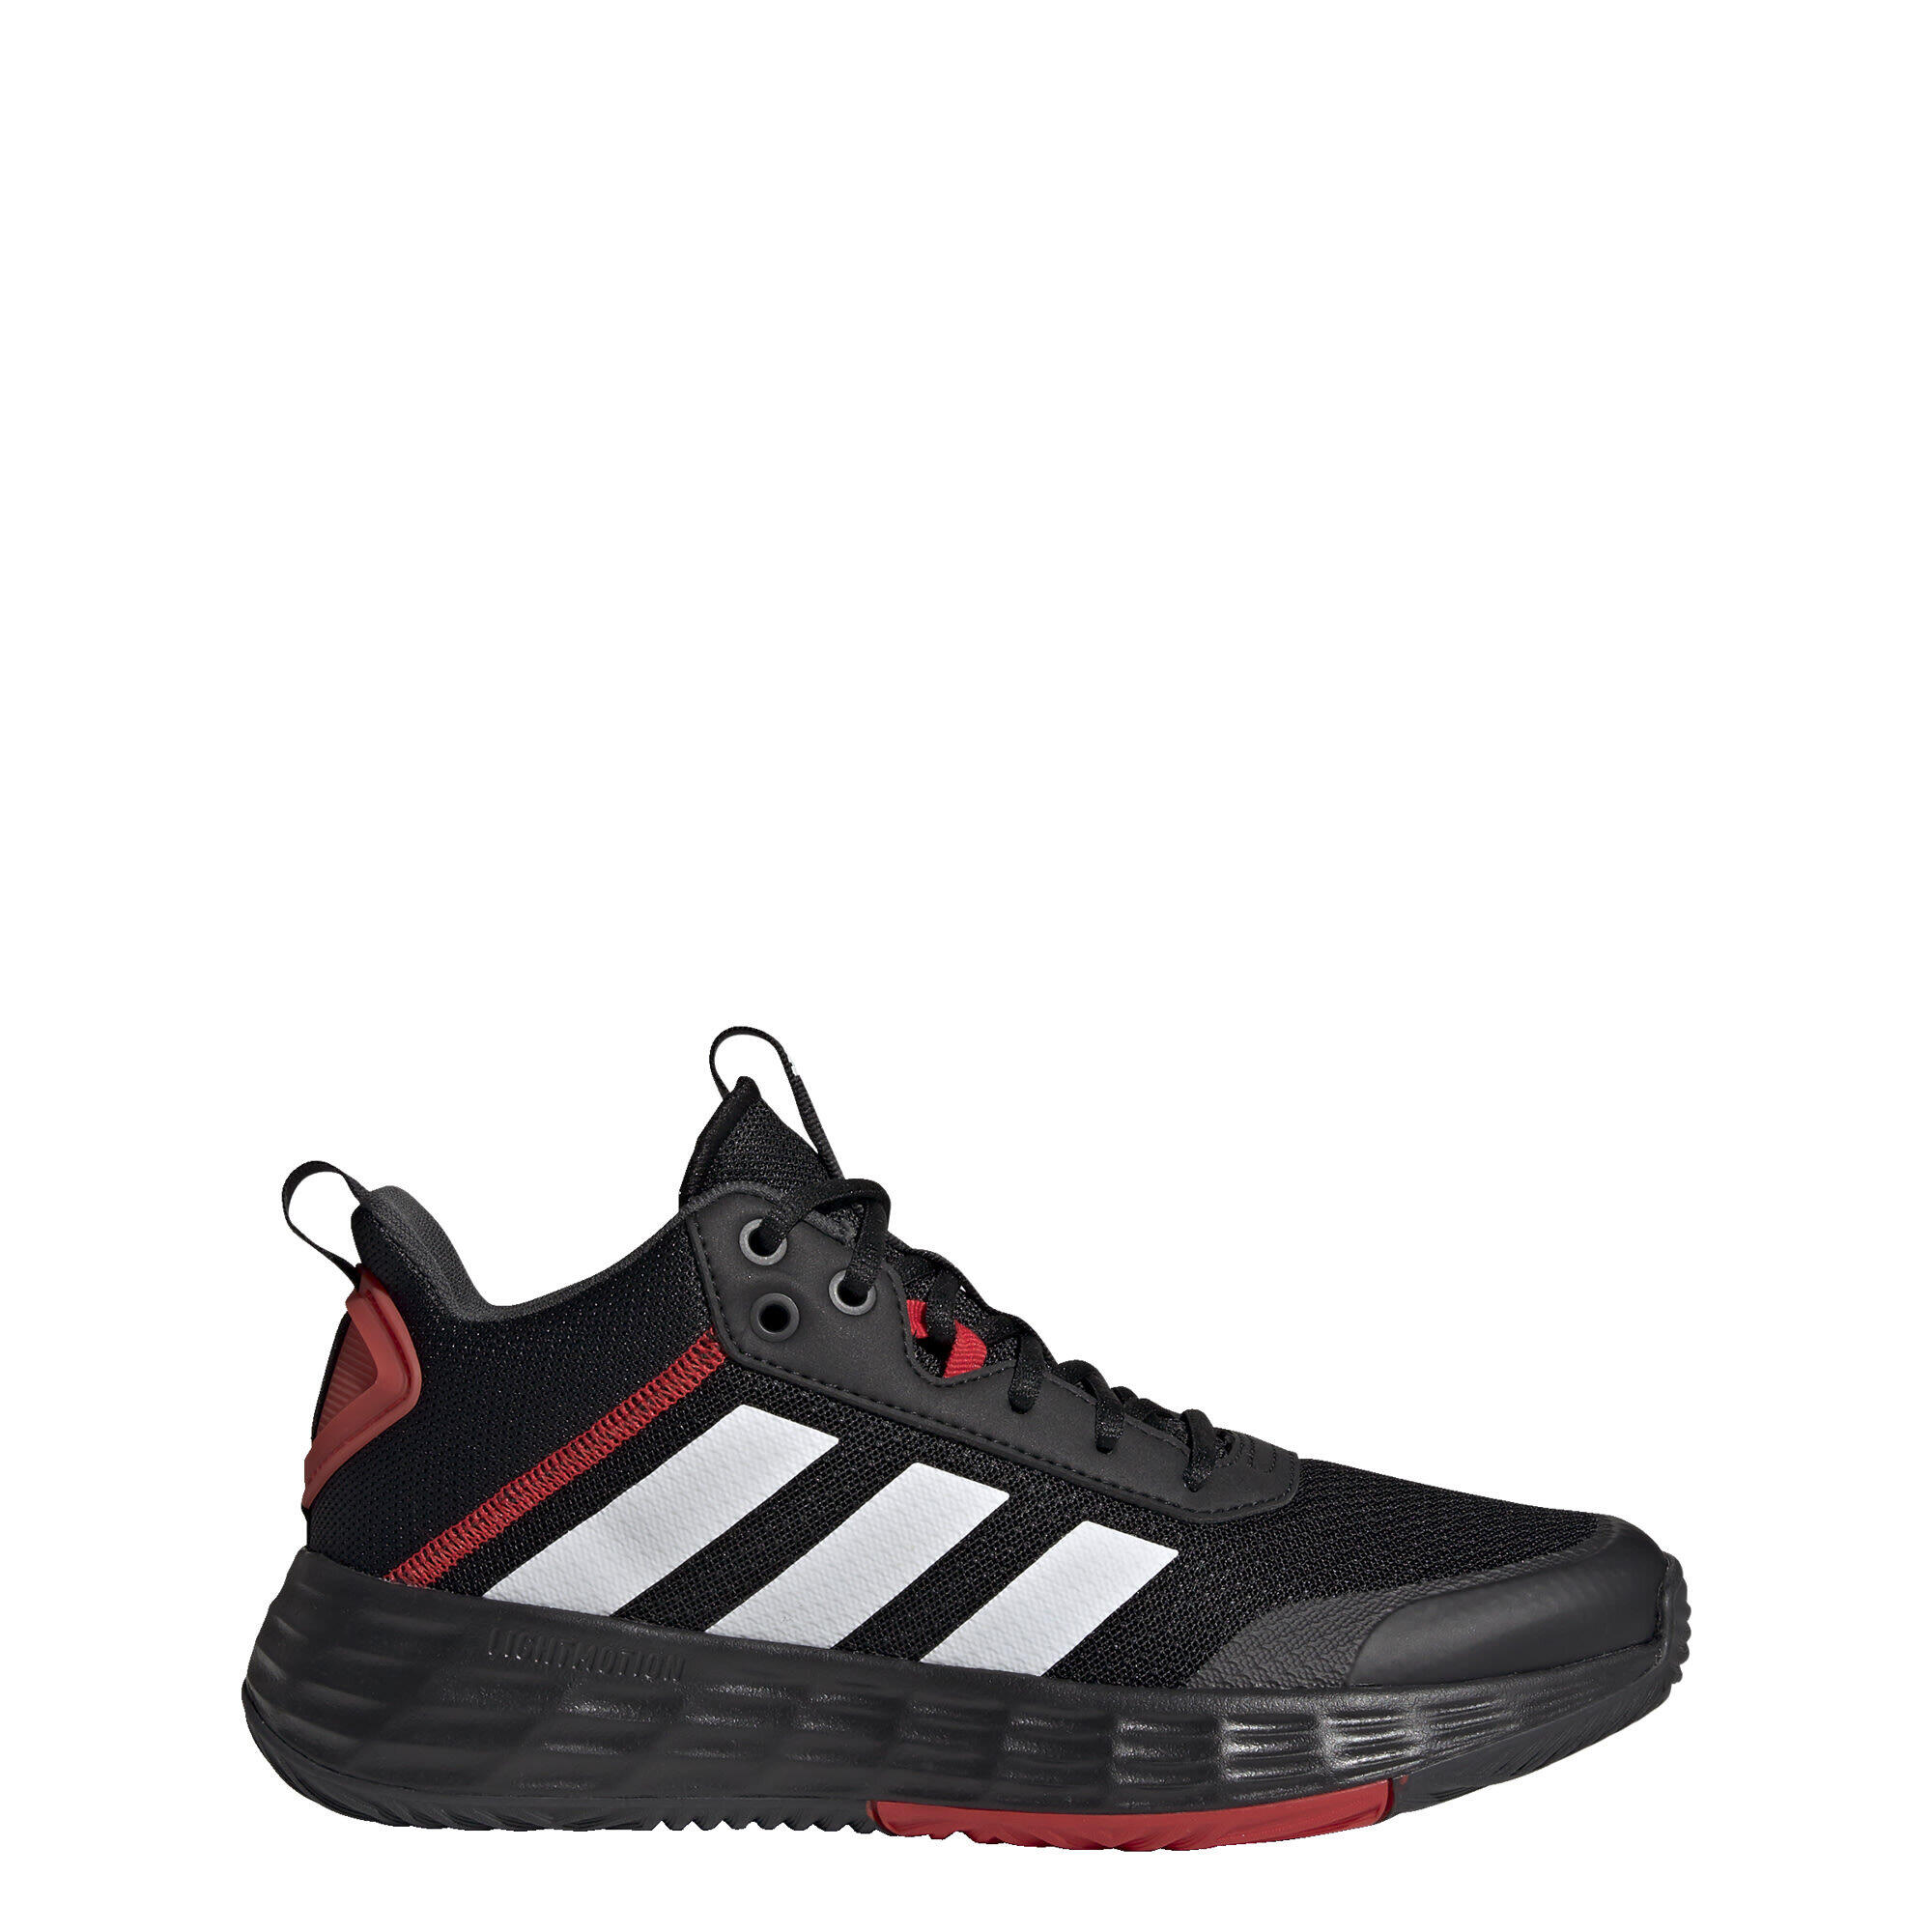 ADIDAS Ownthegame Shoes